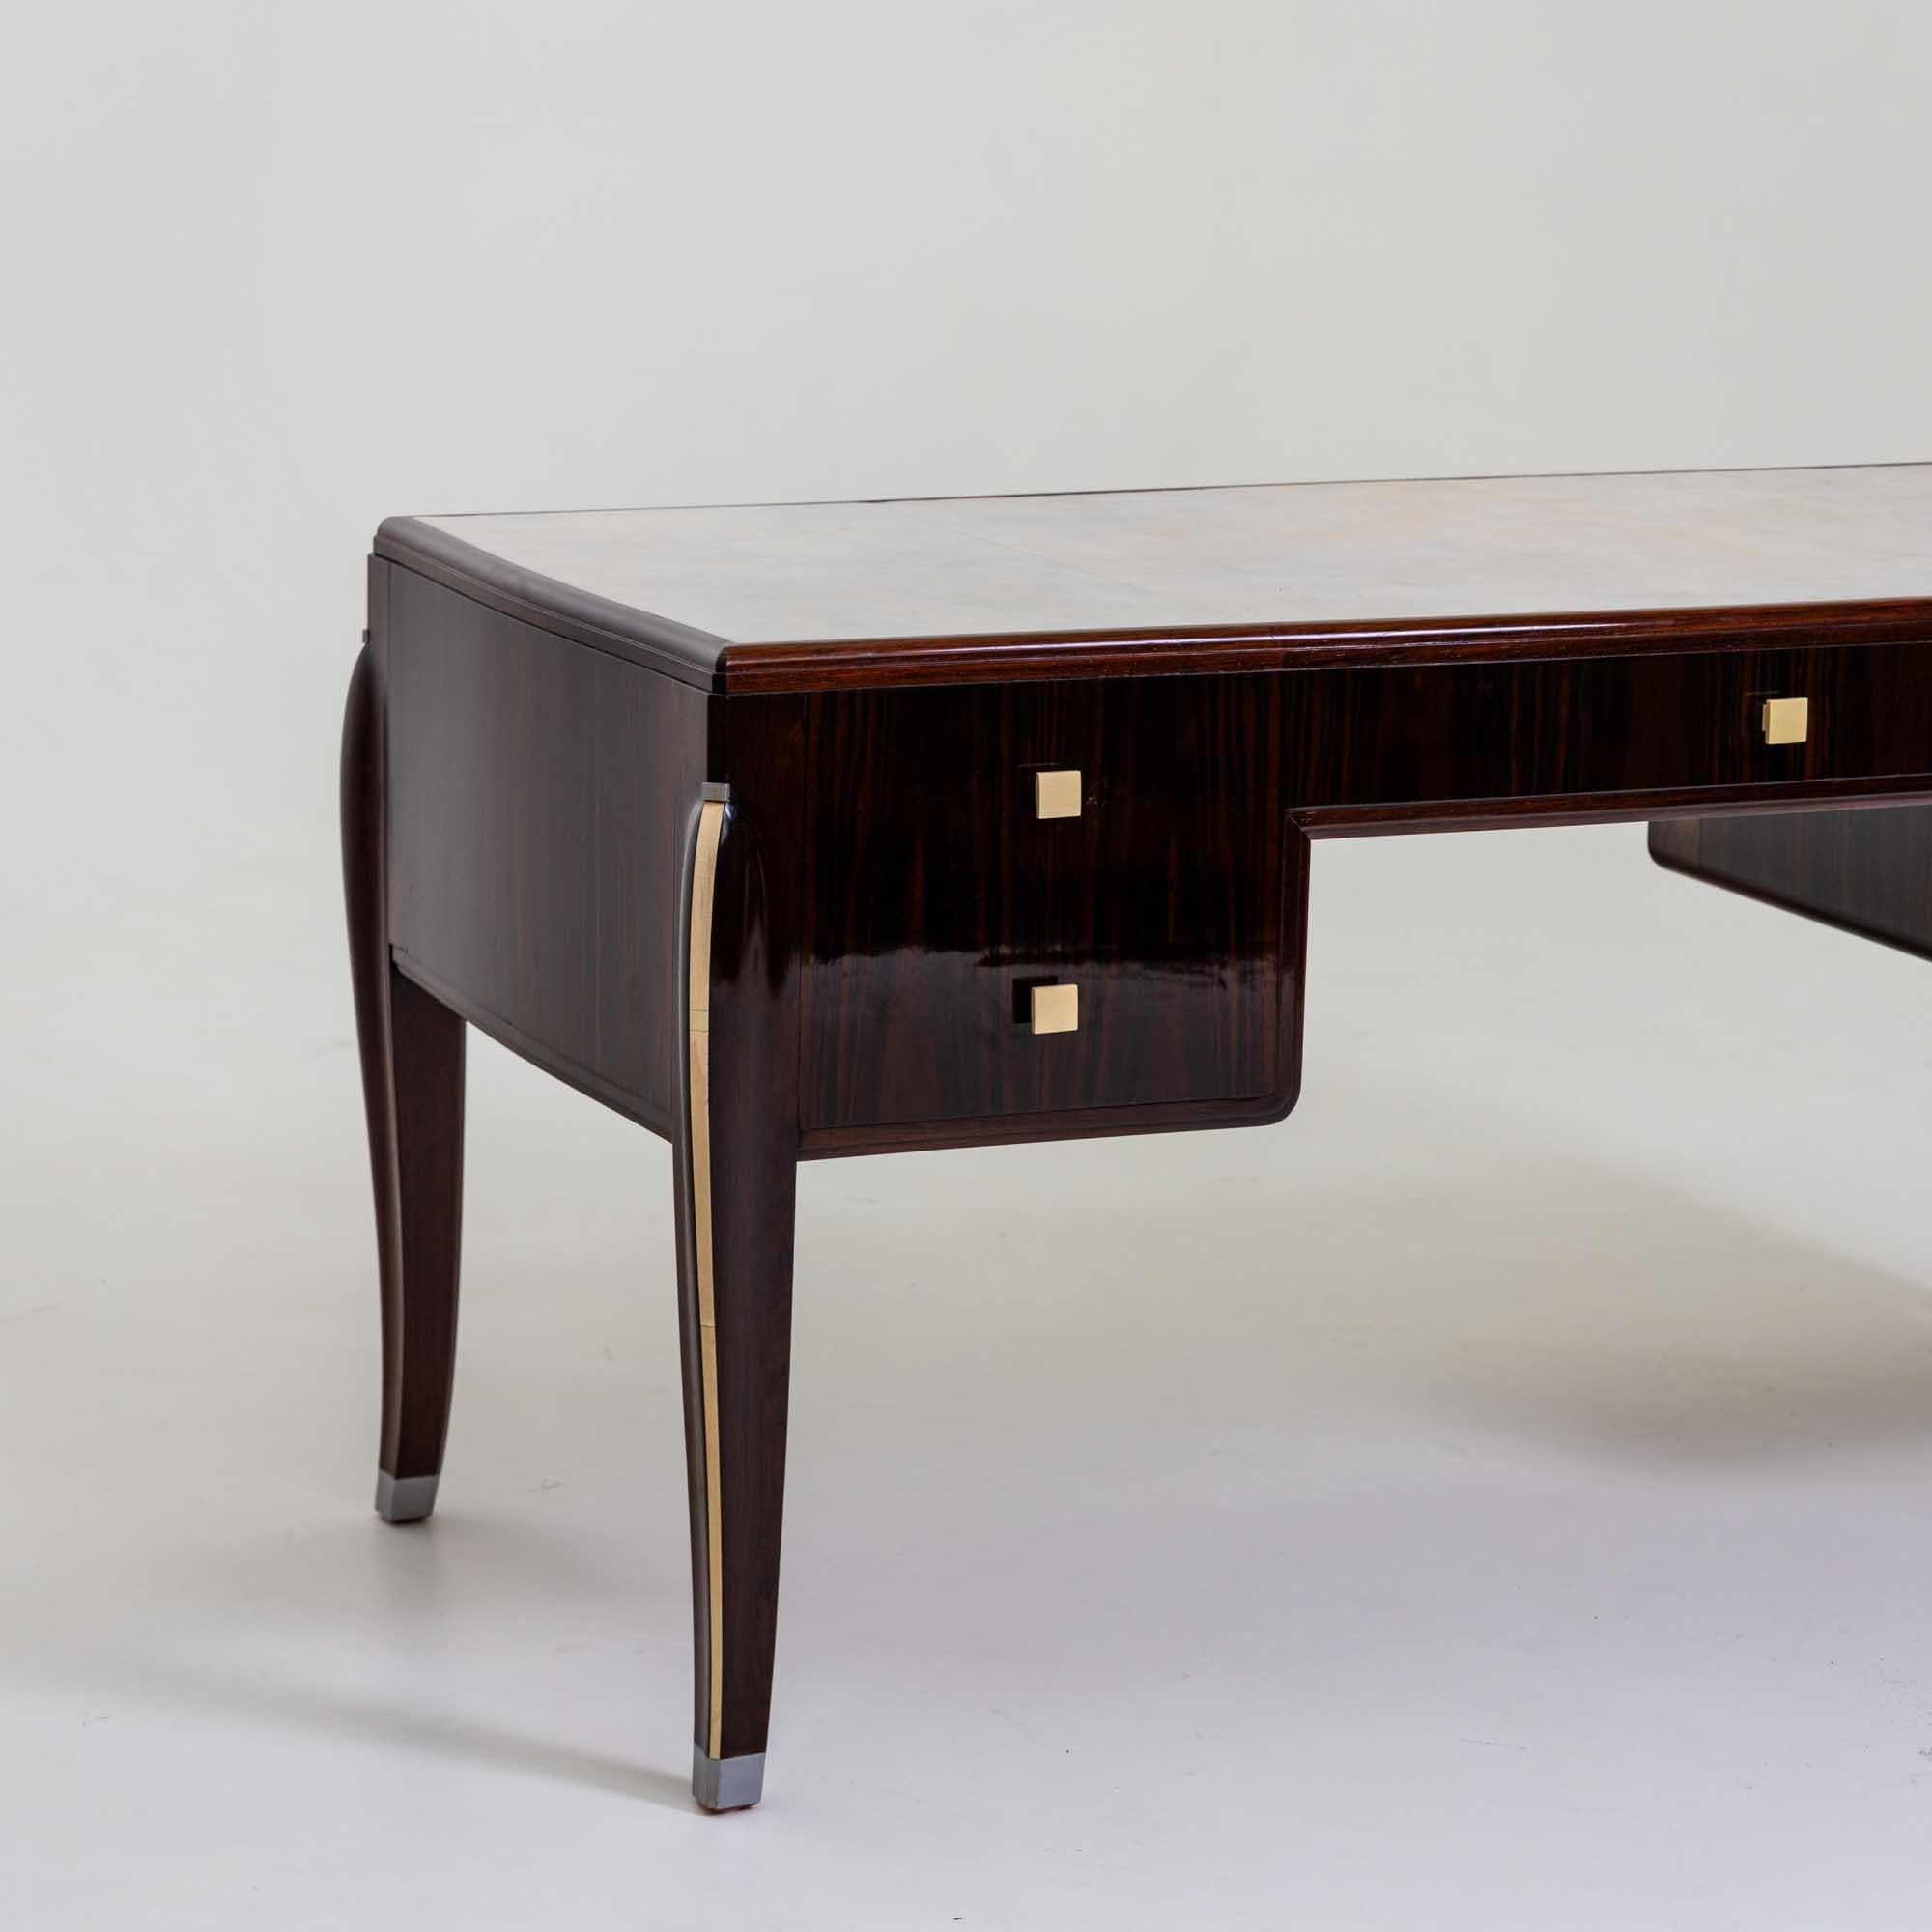 Art Deco Desk in the style of Jacques-Emile Ruhlmann (1879-1933), France, 1920s For Sale 9